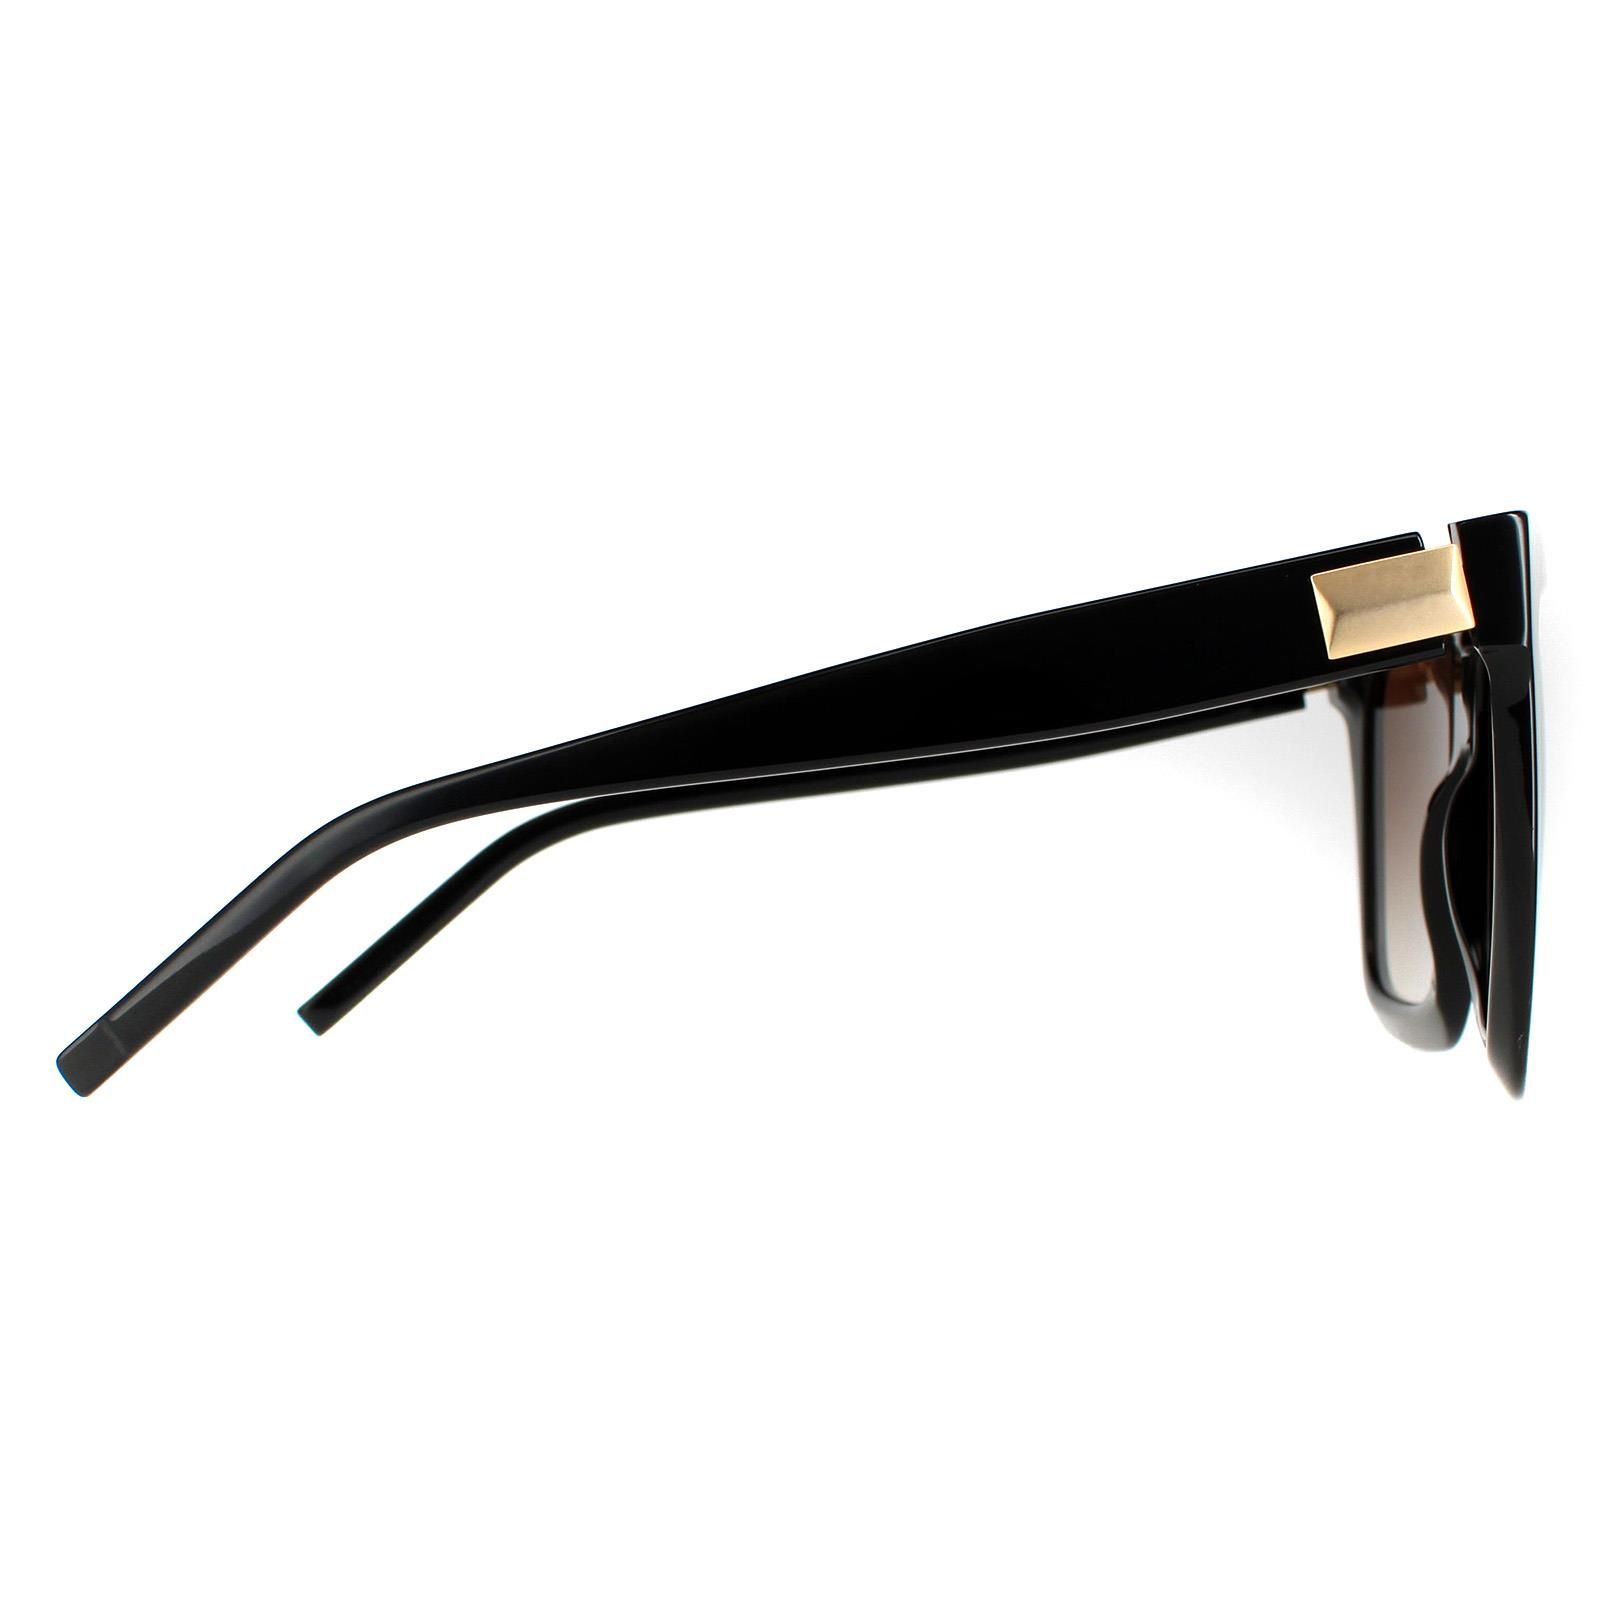 Hugo Boss Square Womens Black Brown Gradient BOSS 1152/S  Hugo Boss are a super oversized chic square design made from lightweight plastic with metal Hugo Boss branding on the temples.